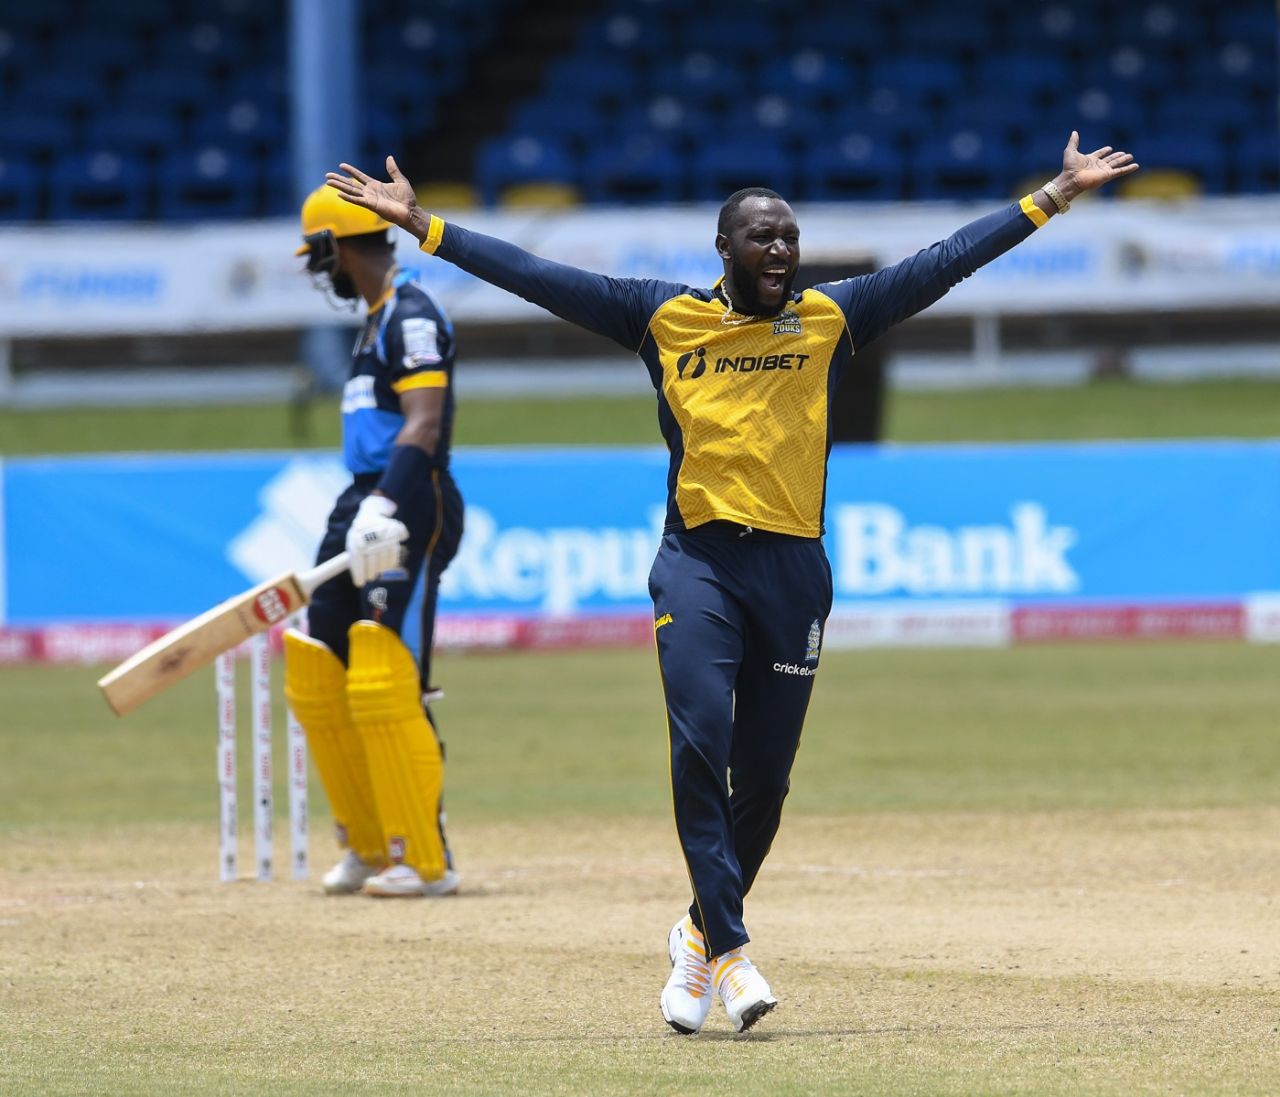 Kesrick Williams appeals successfully for the wicket of Shai Hope, Barbados Tridents v St Lucia Zouks, CPL 2020, Port Of Spain, August 30, 2020